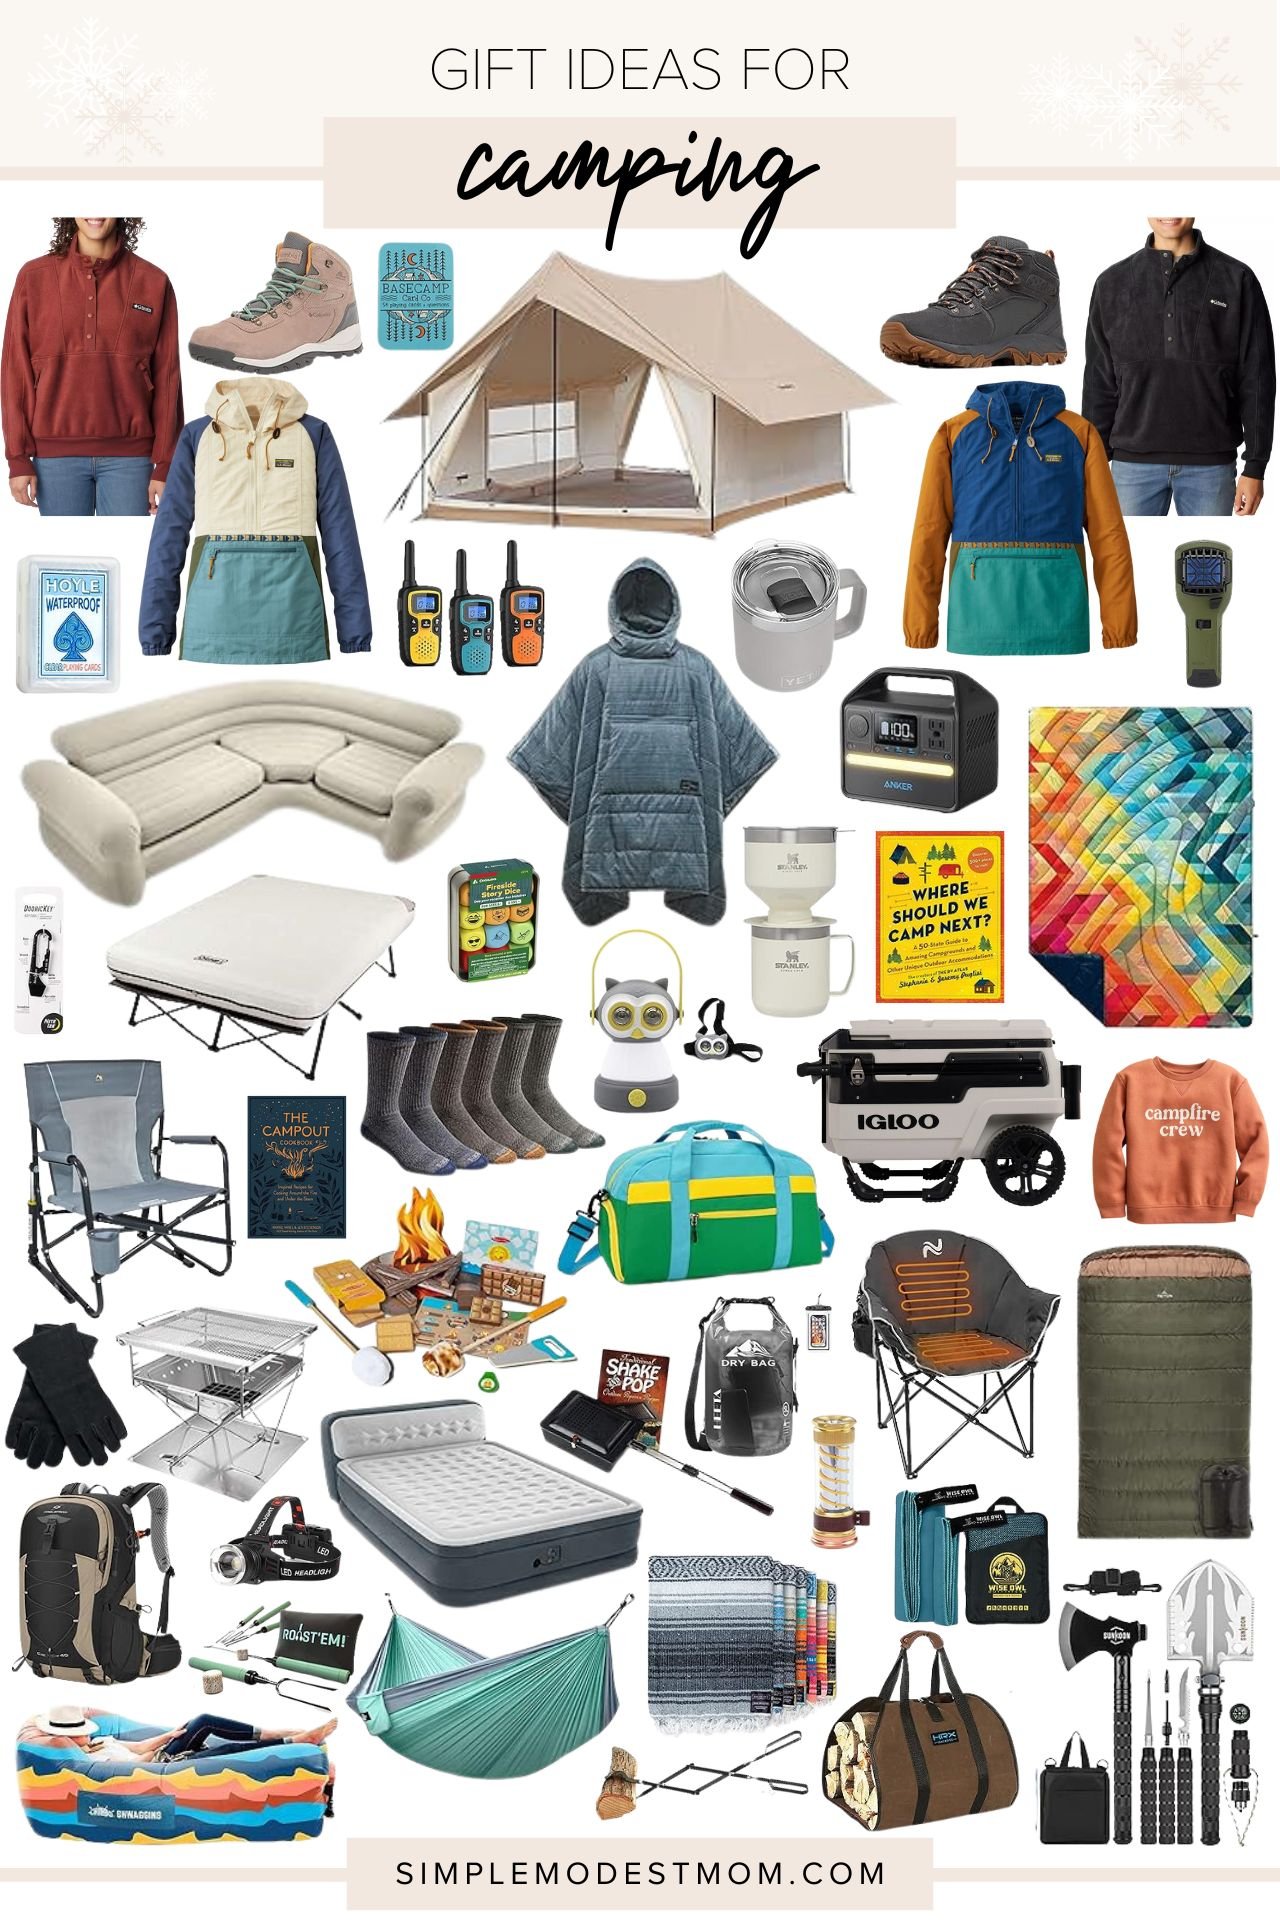 Gift Ideas for Camping for Christmas.jpg